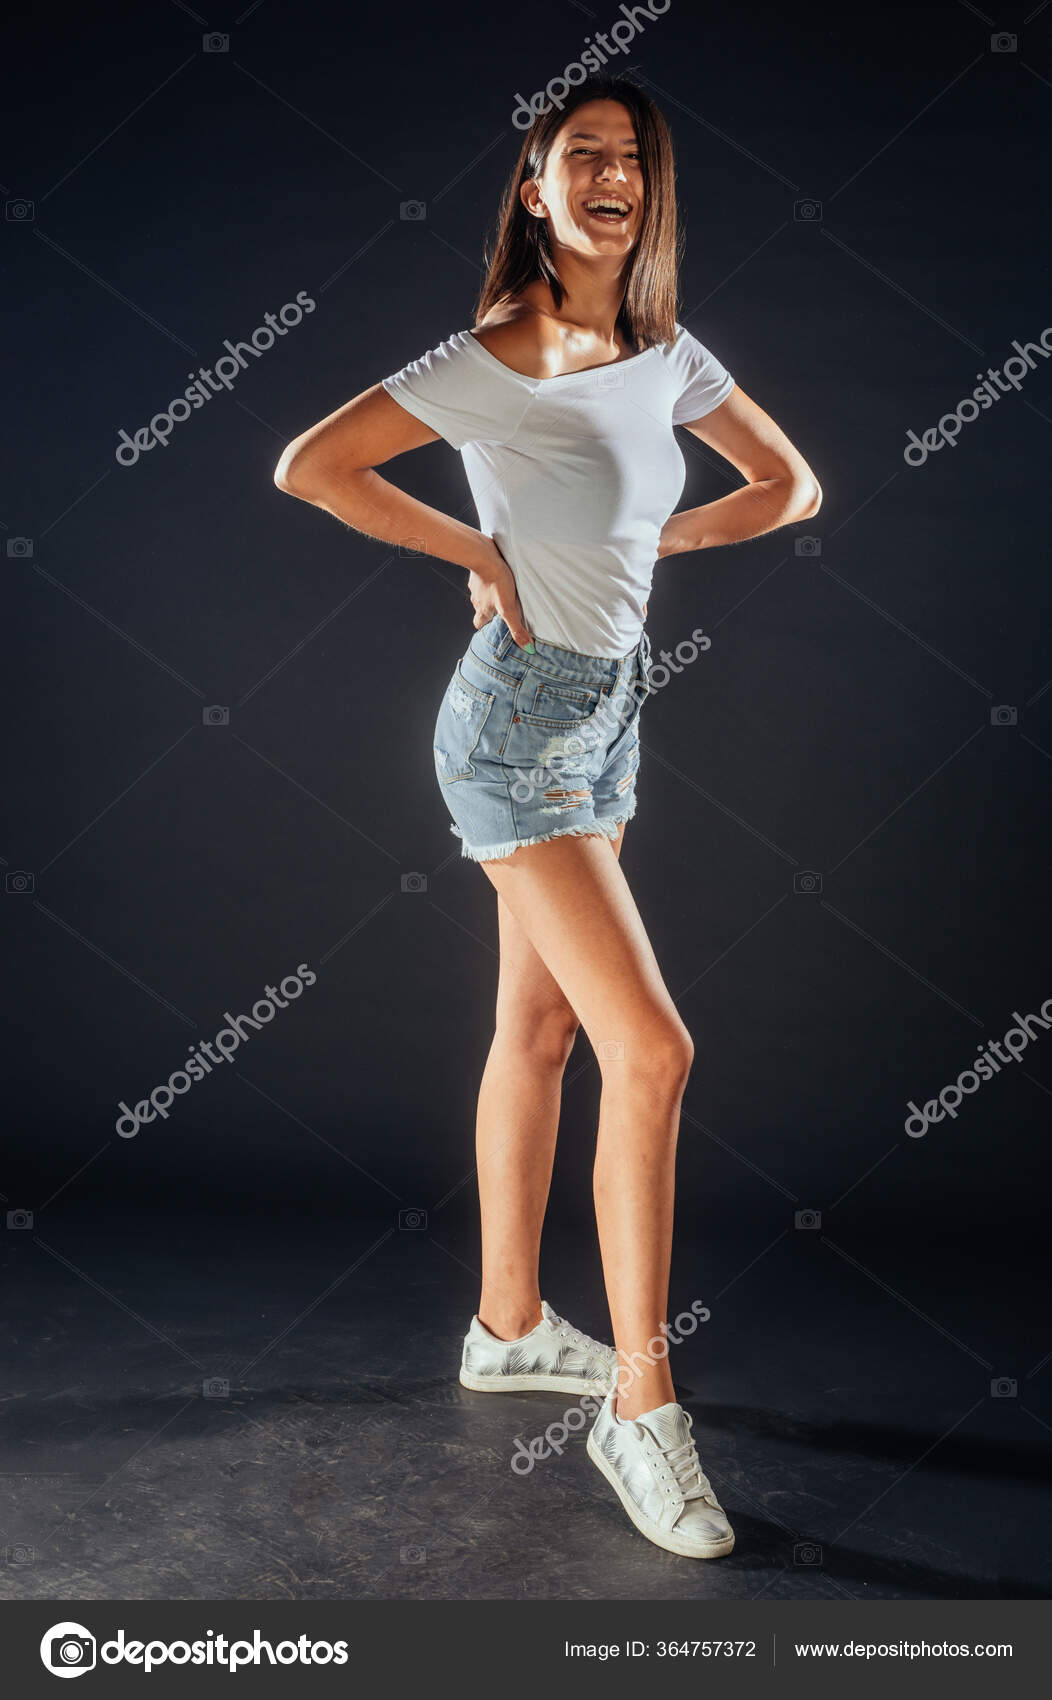 Cool Good Looking Girl Wearing Stylish Short Pants And White T